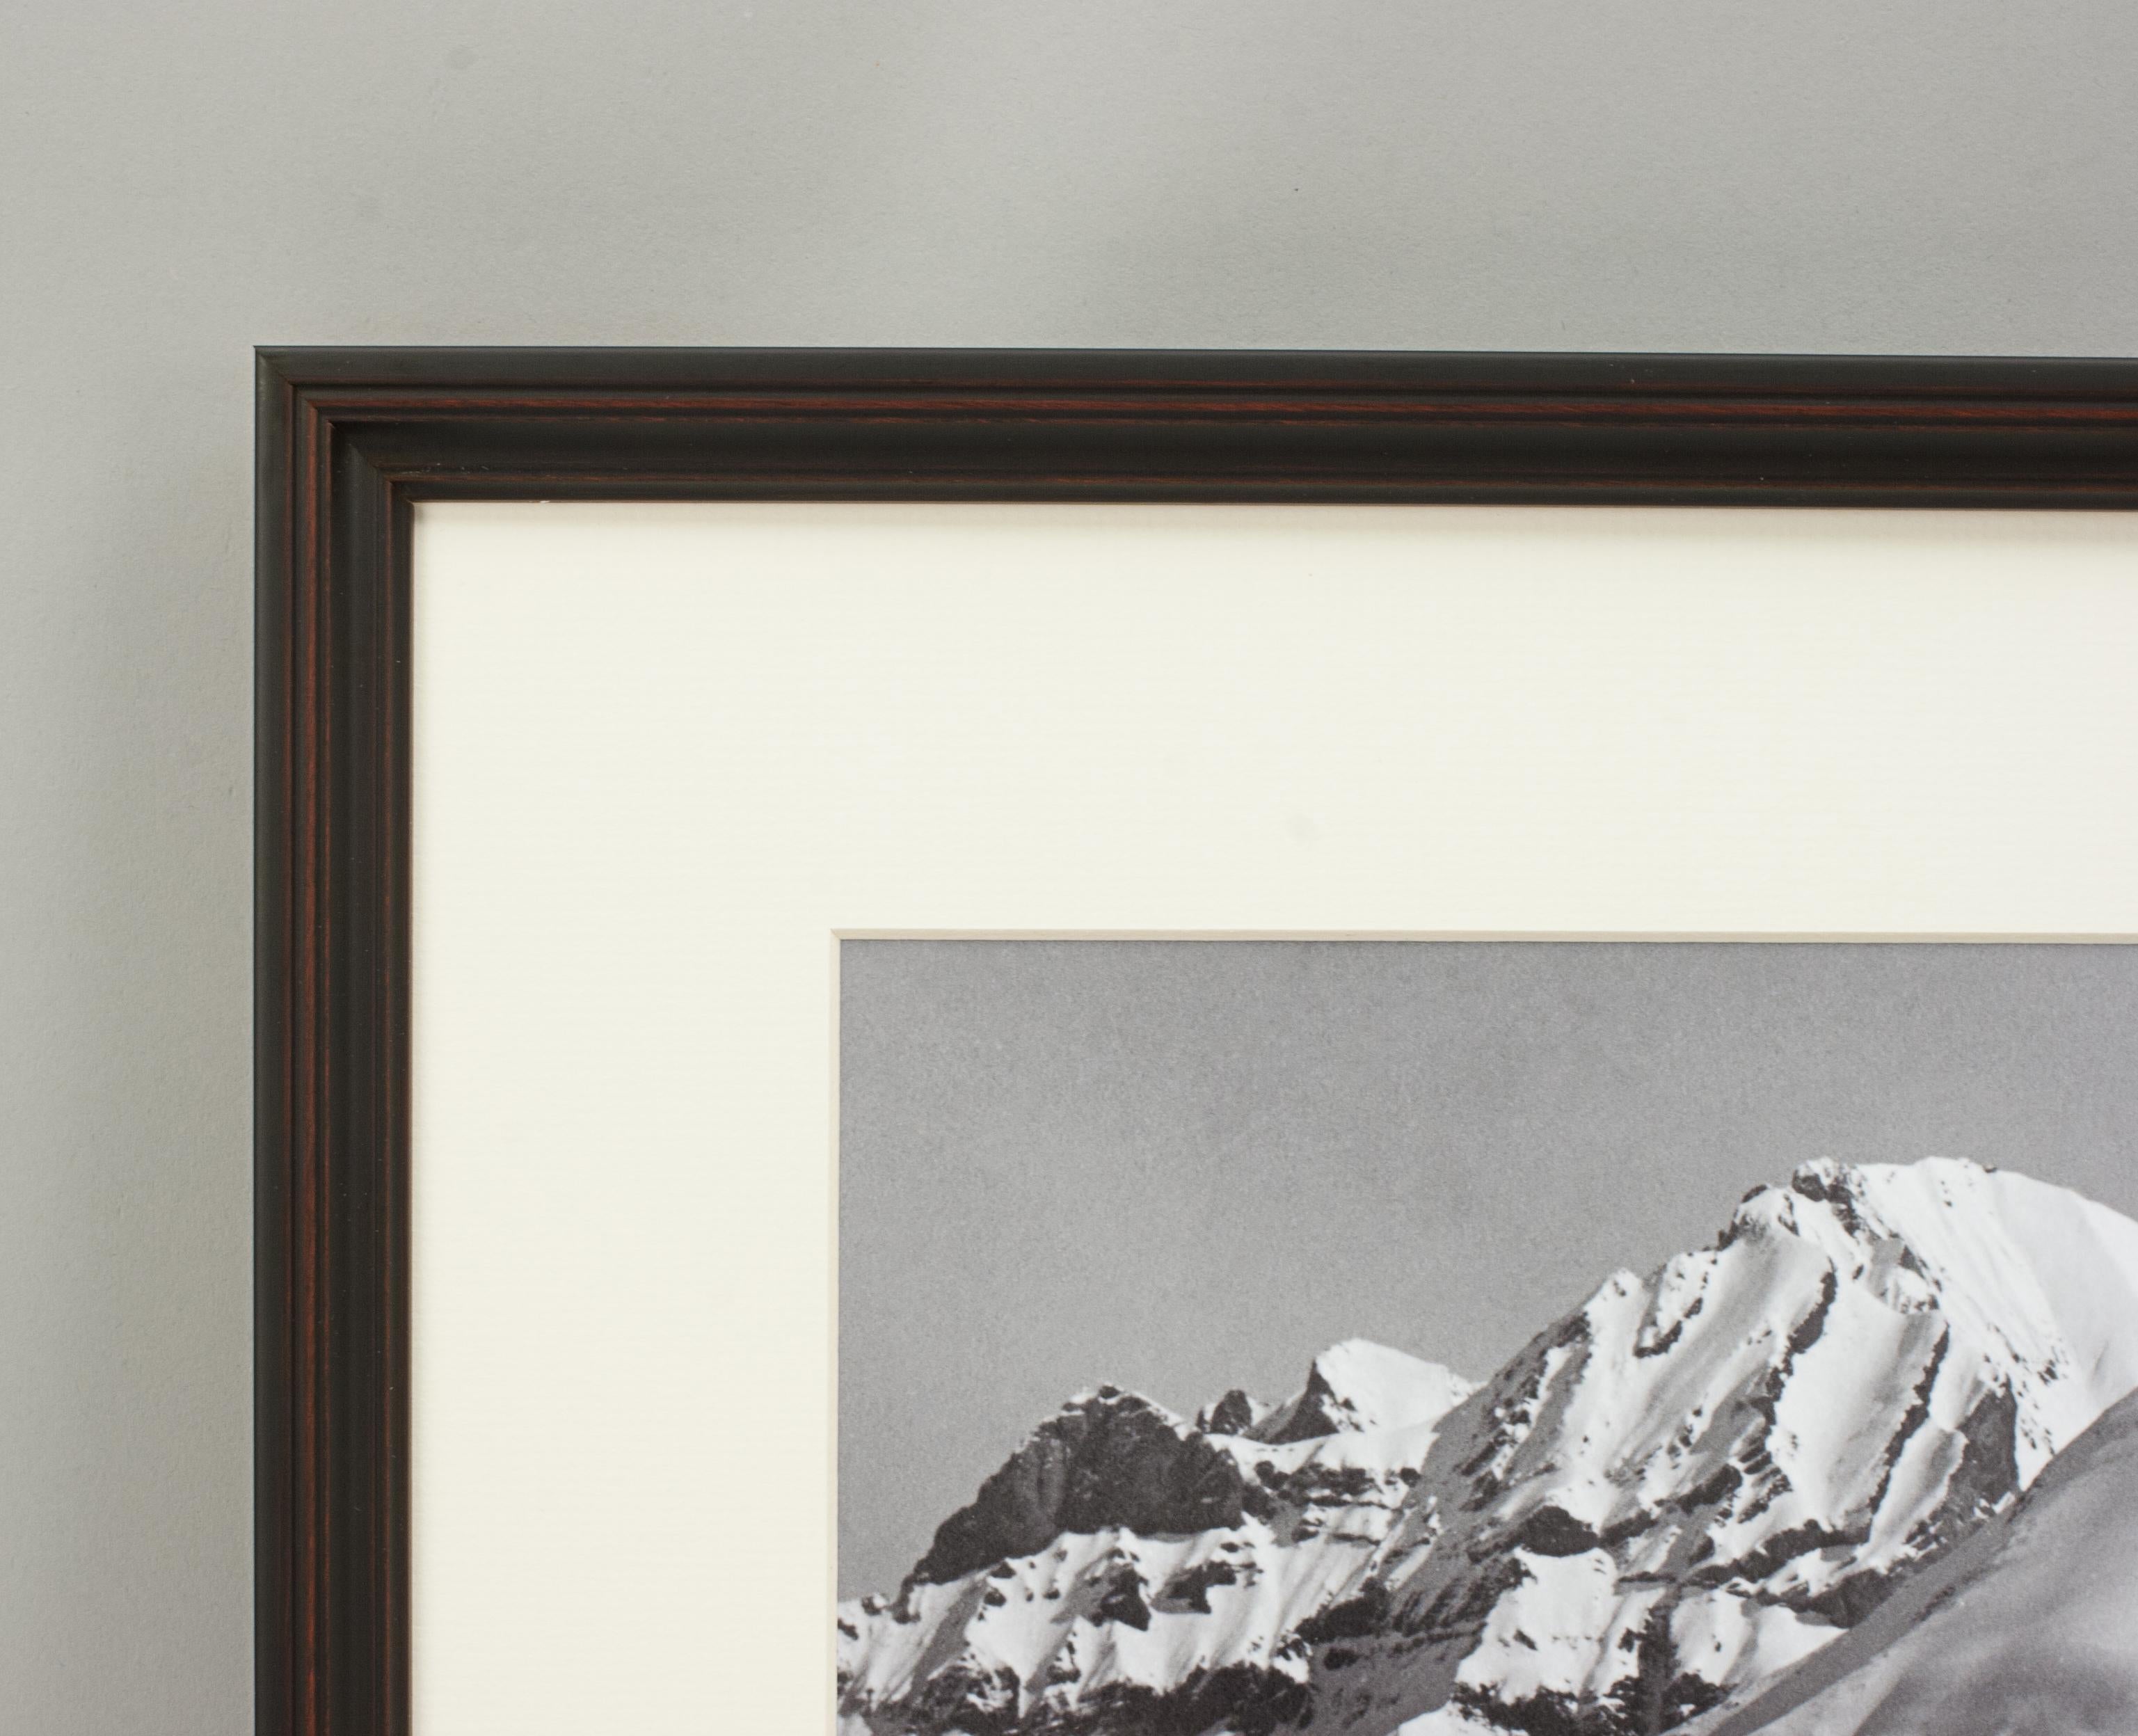 Paper Vintage Style Photography, Framed Alpine Ski Photograph, The Climber For Sale